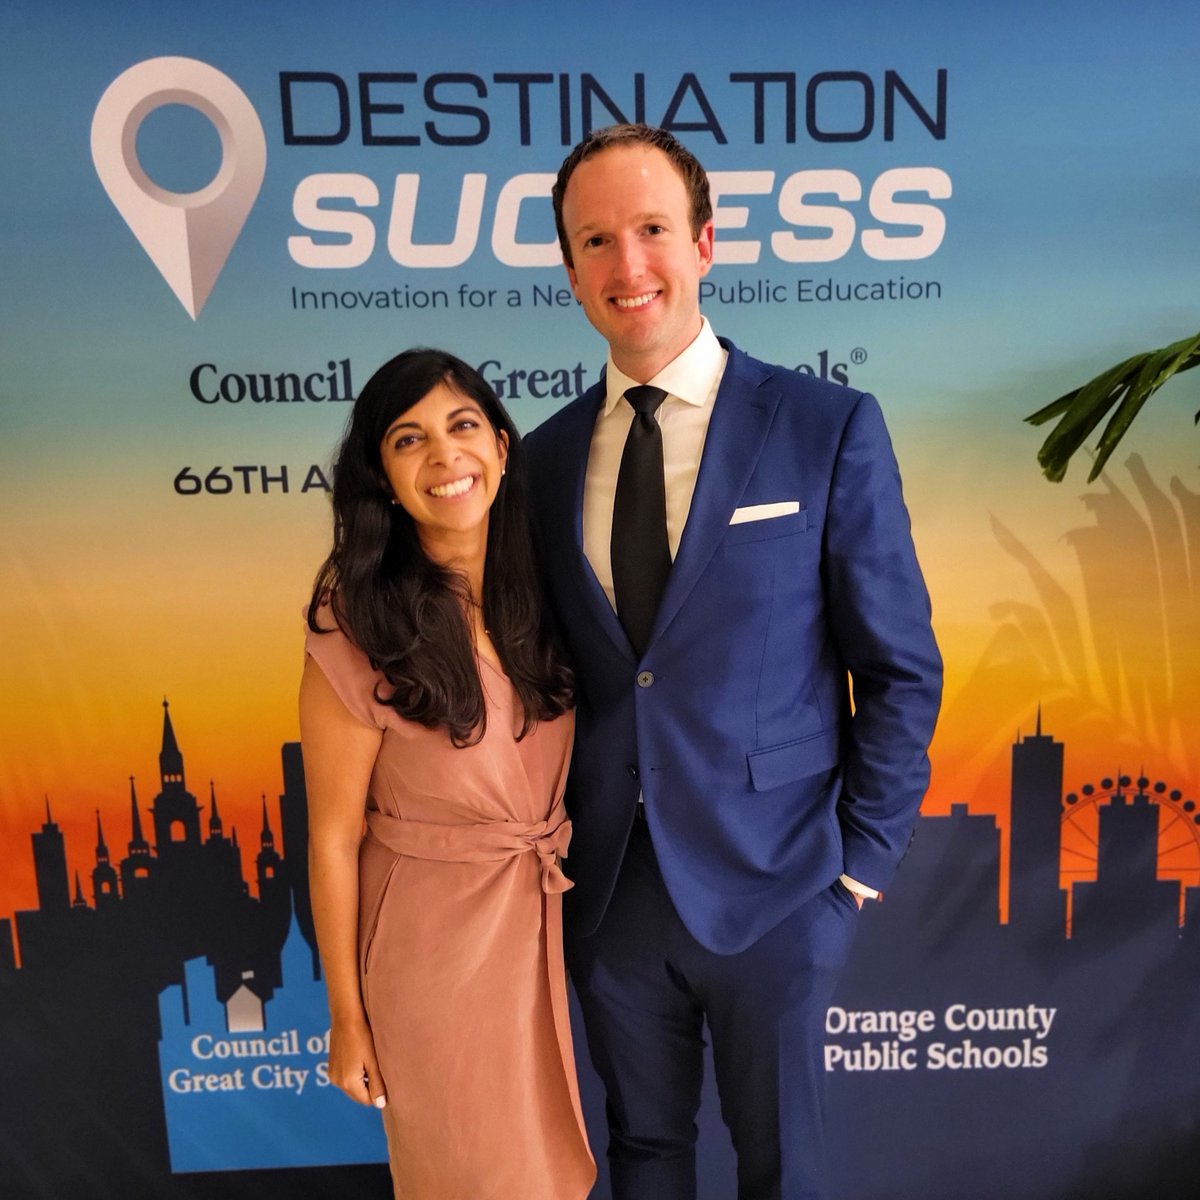 Having a blast with @Sonali_Avela and the @AvelaEducation team at @GreatCitySchls Conference in Orlando. Let's geek out on #education #equity and #enrollment reform! #CGCS22